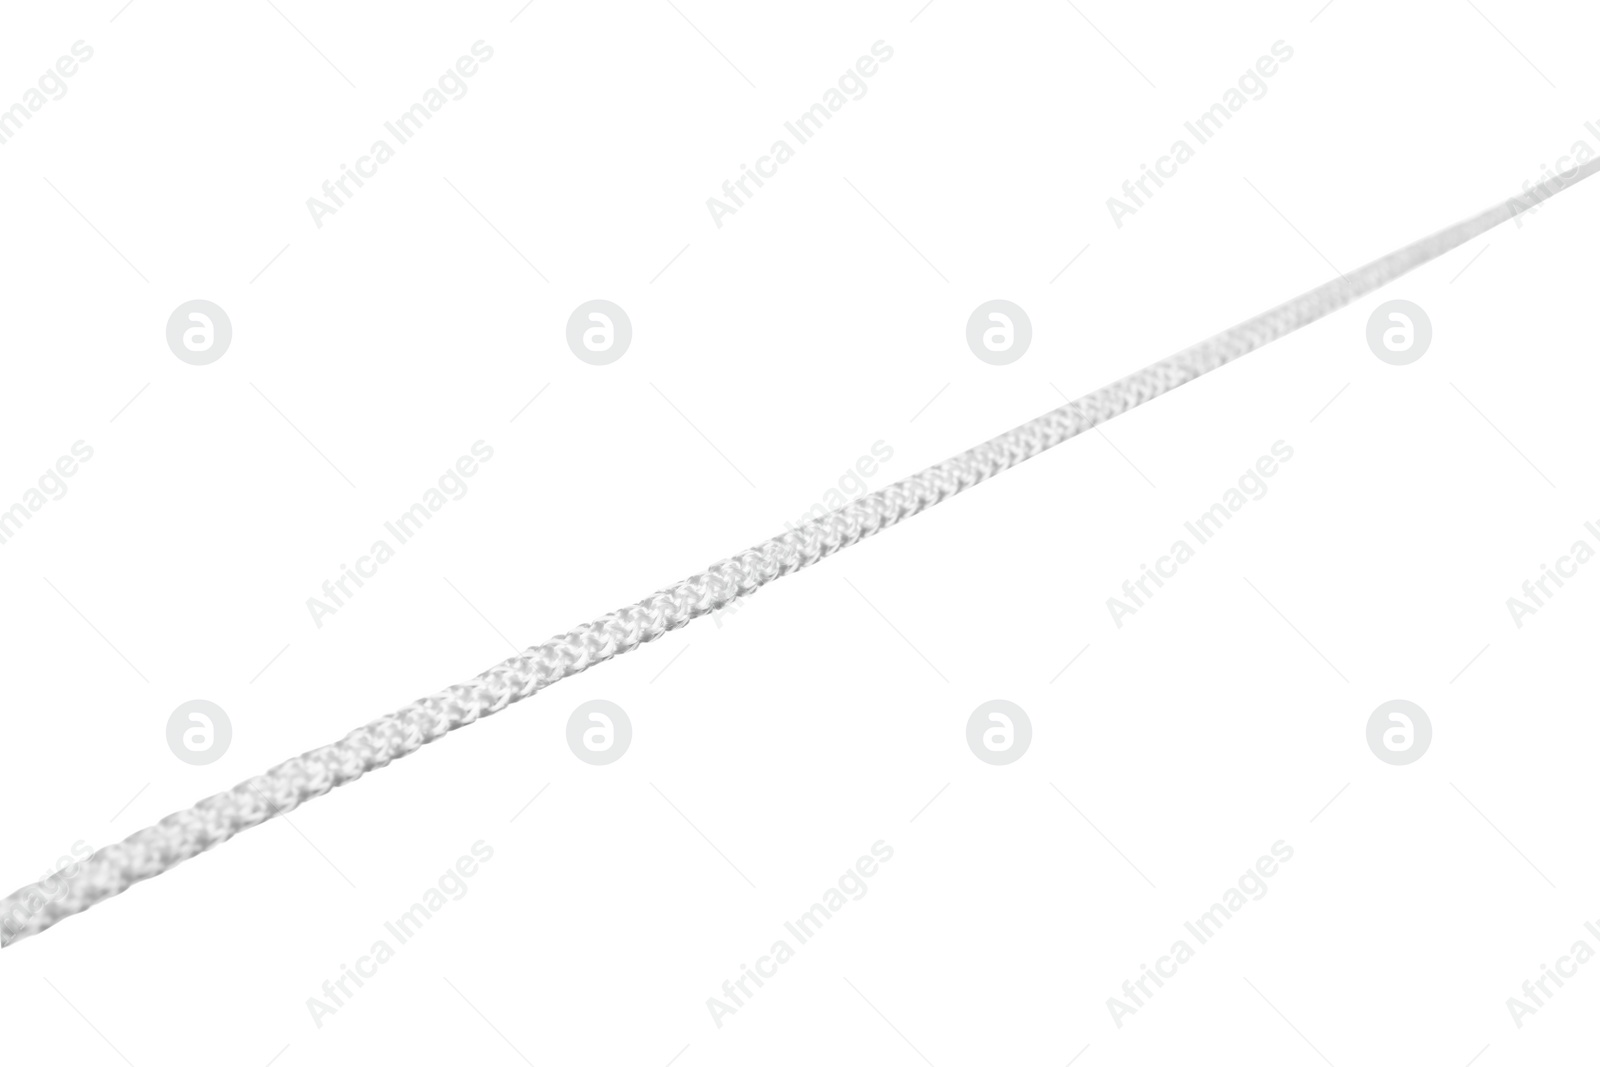 Photo of Color rope on white background. Simple design